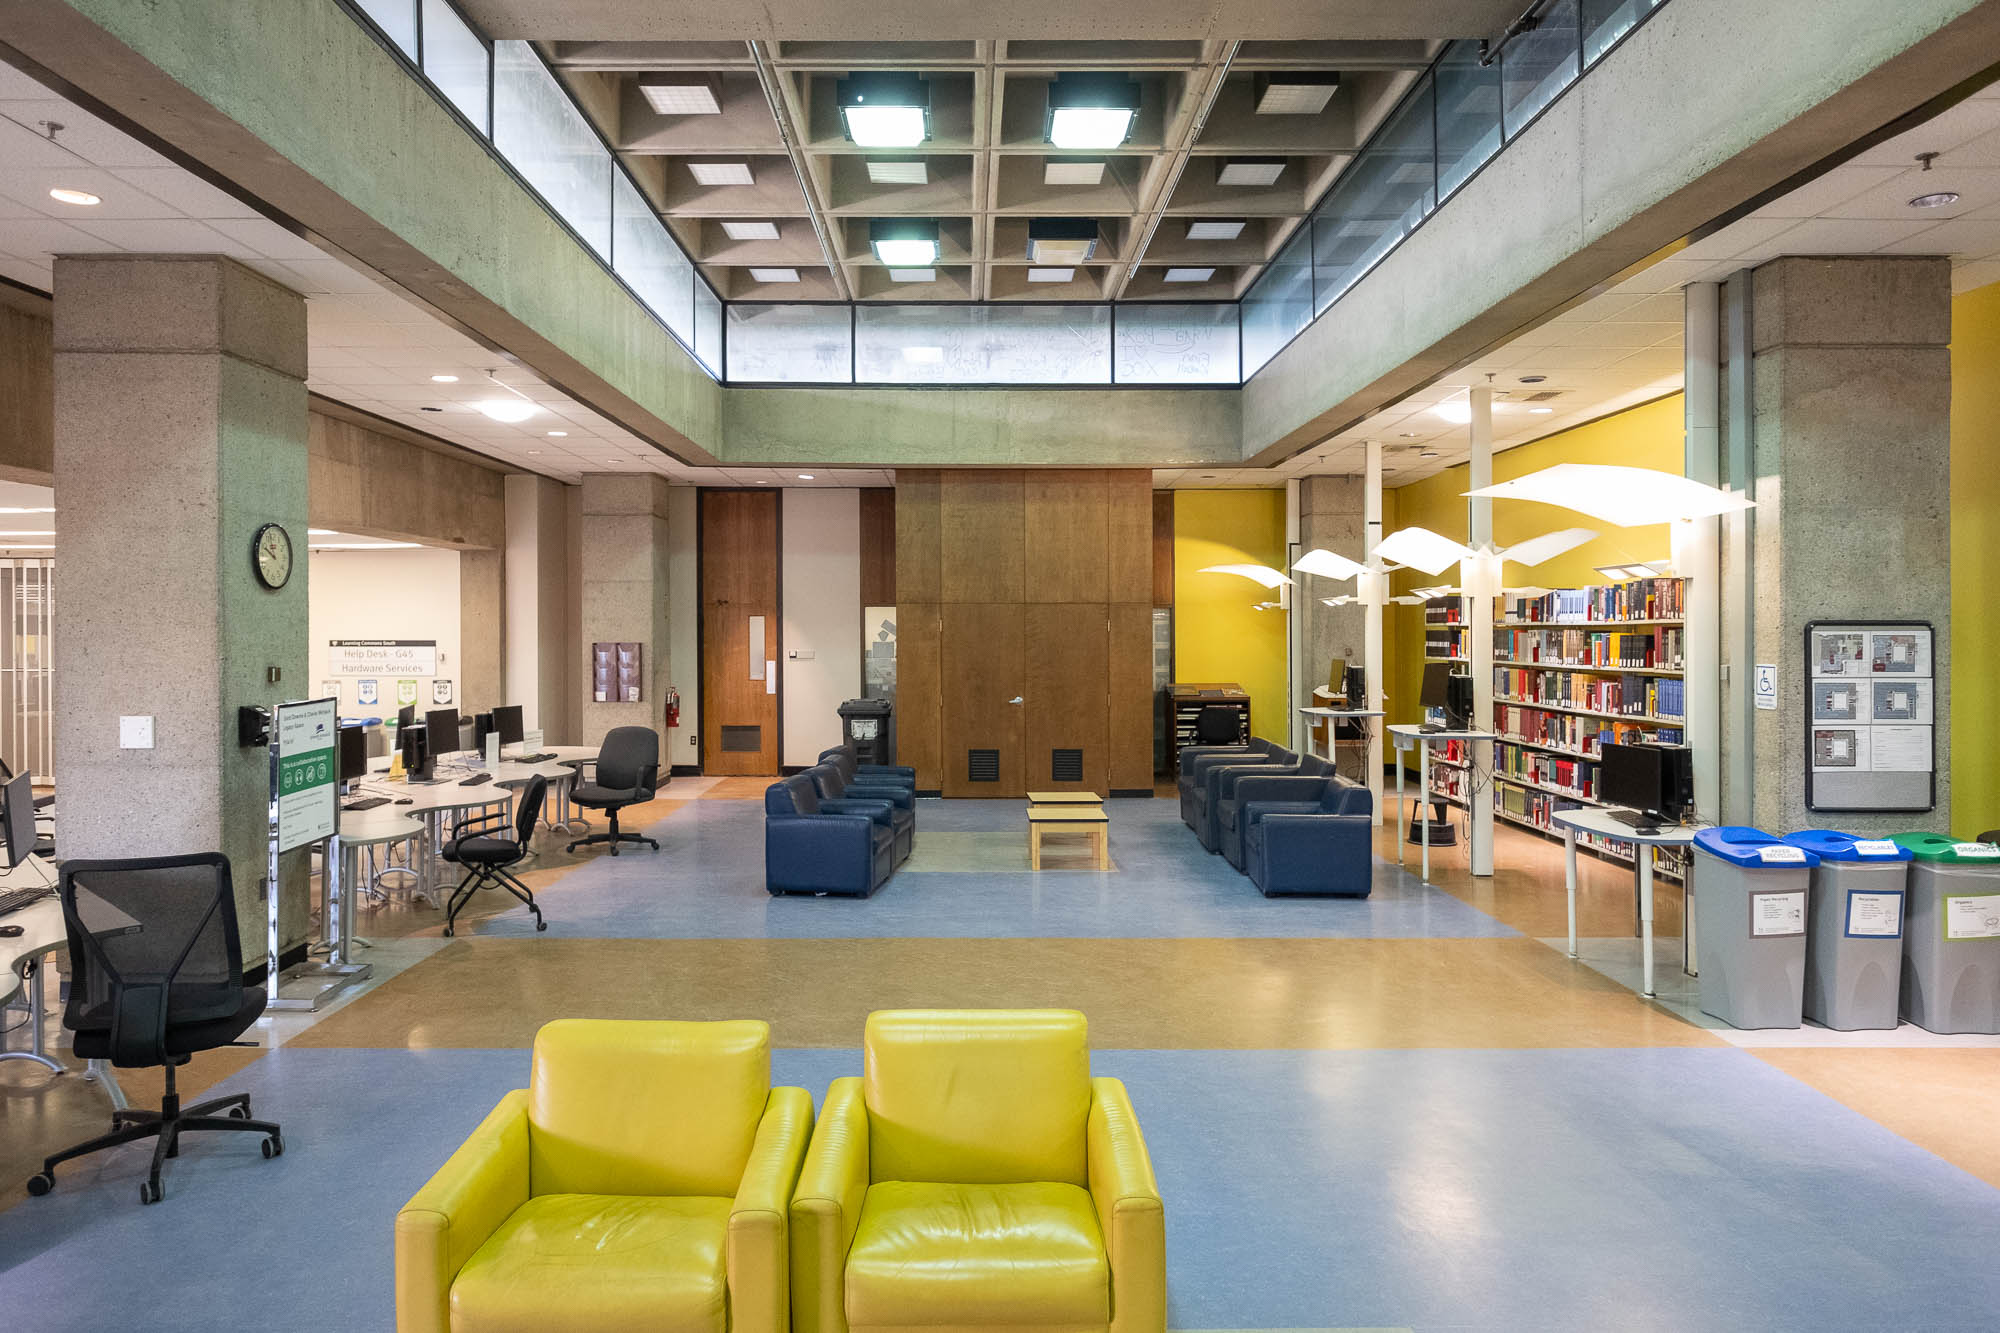 Interior of a Brutalist library with waffle ceiling and large concrete columns. The space has been recently refurbished with colourful walls, indirect lighting and colourful sofas.